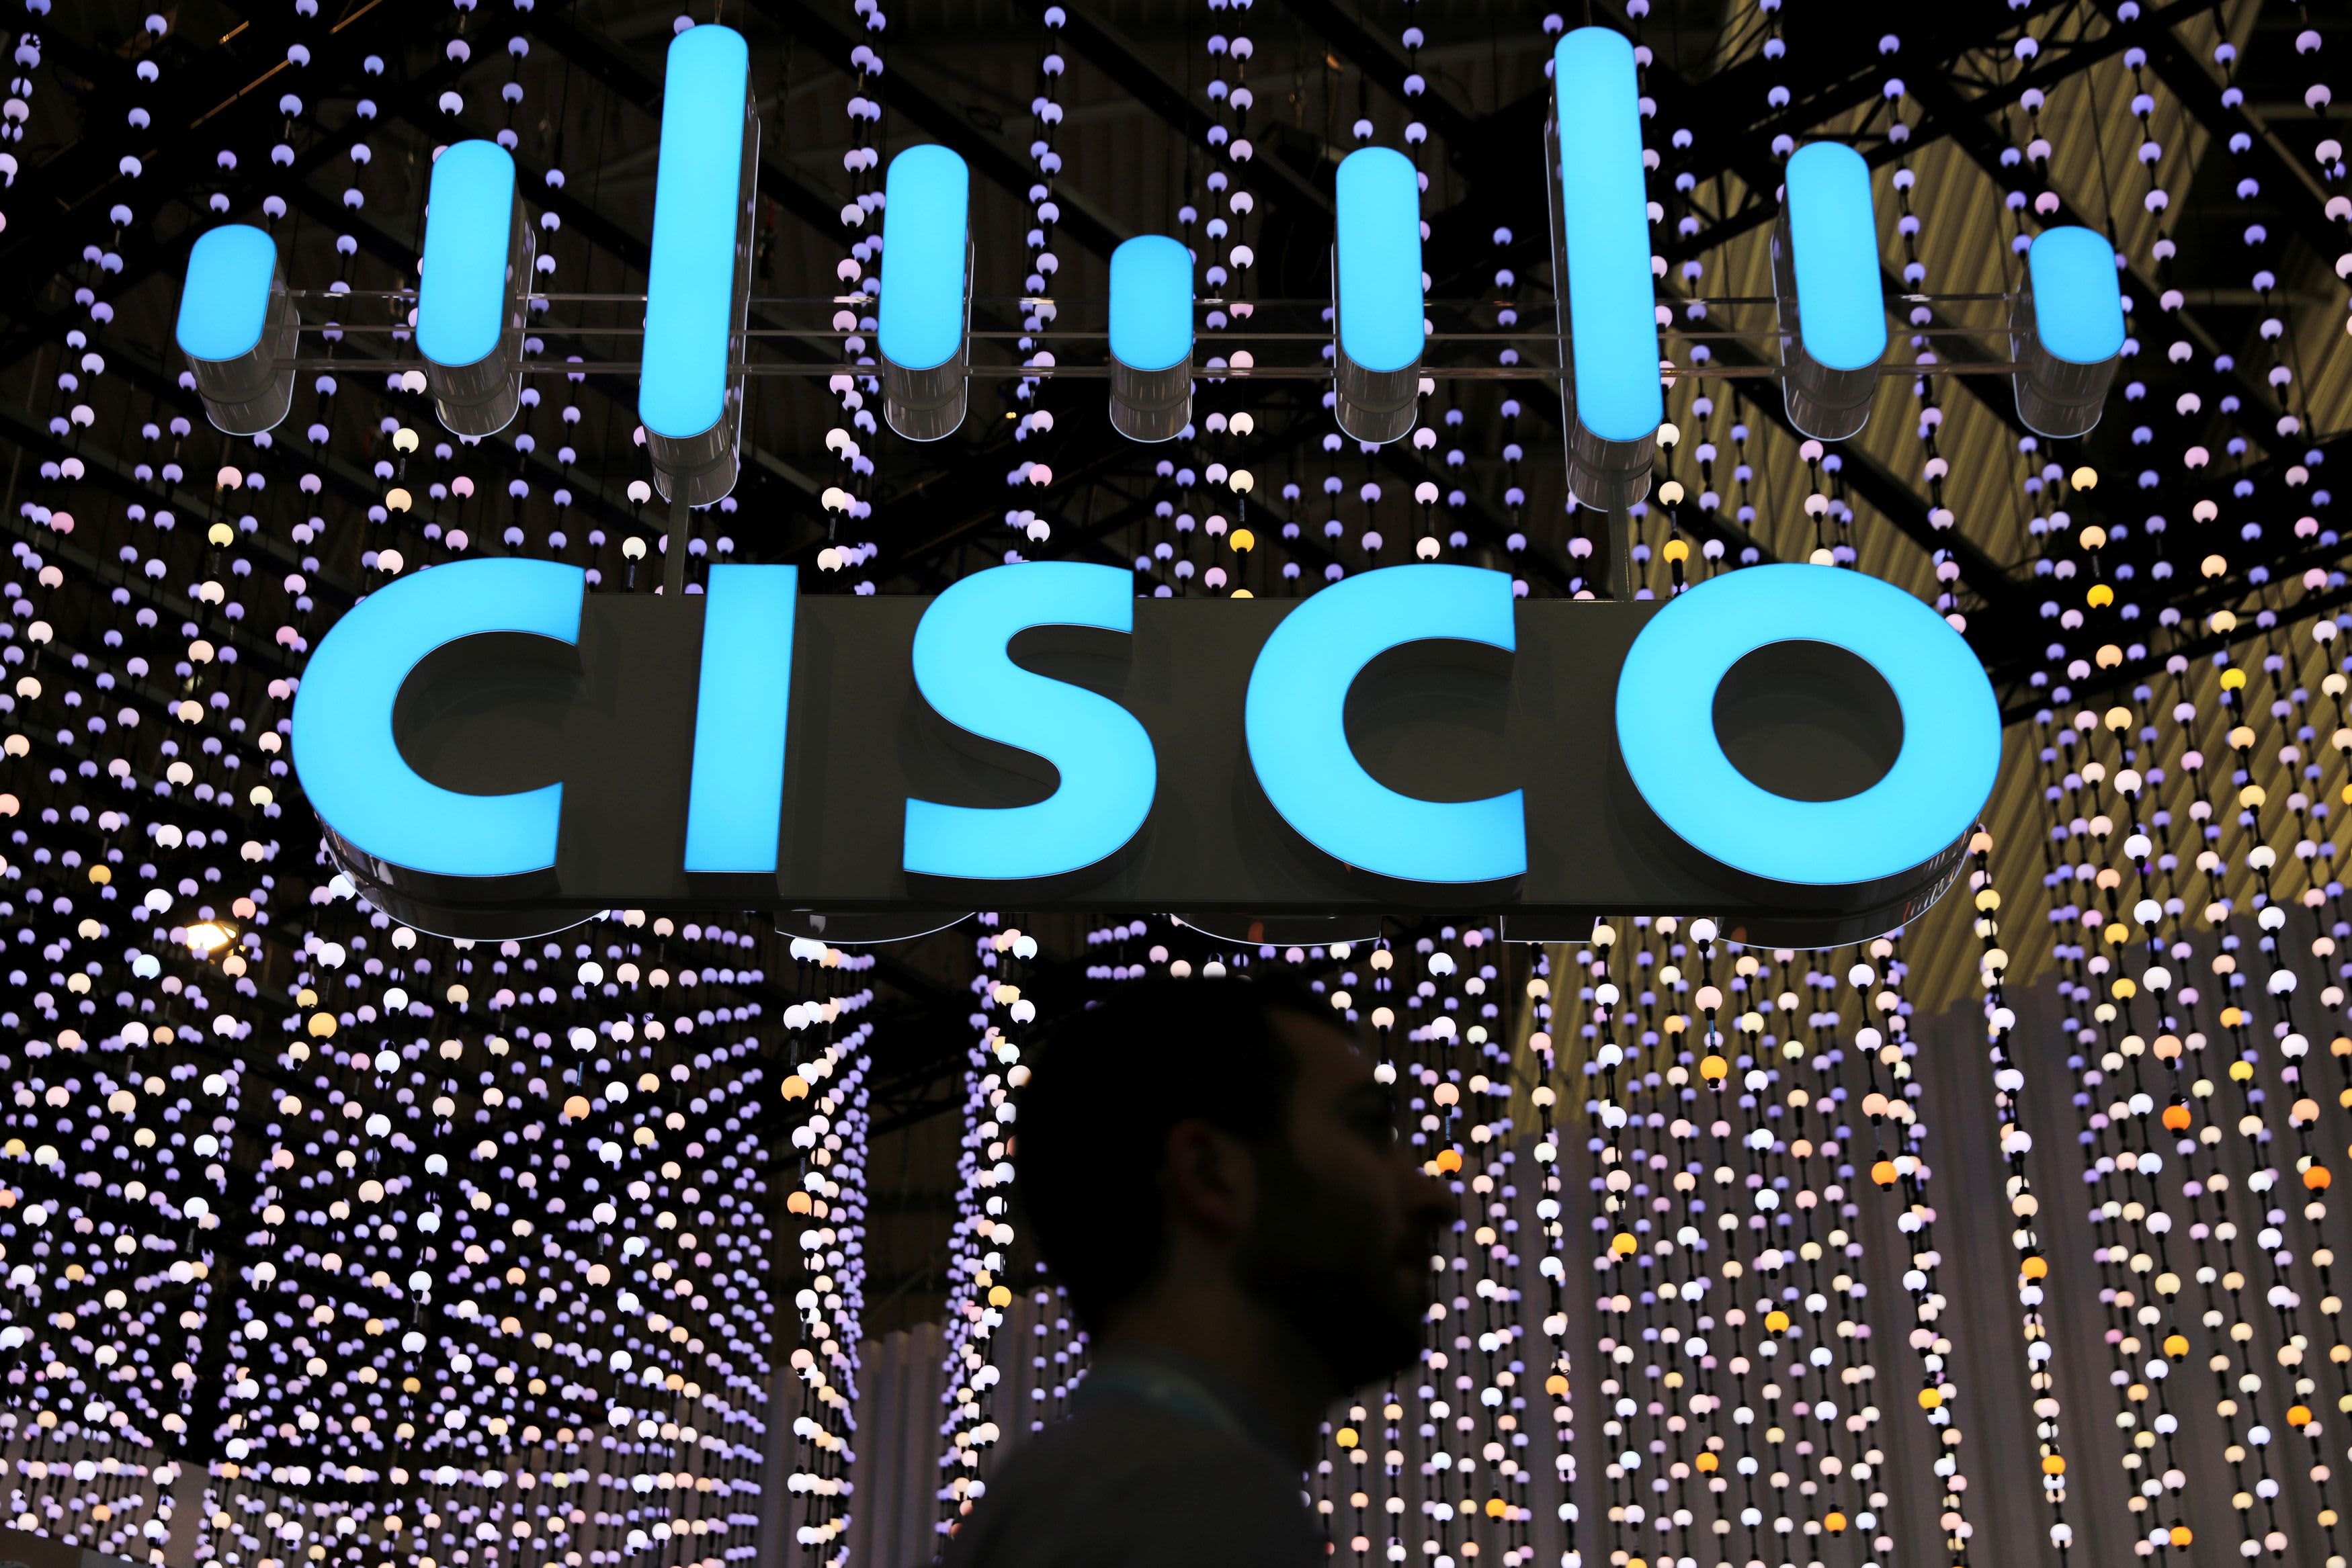 What to expect when economic bellwether Cisco reports quarterly results